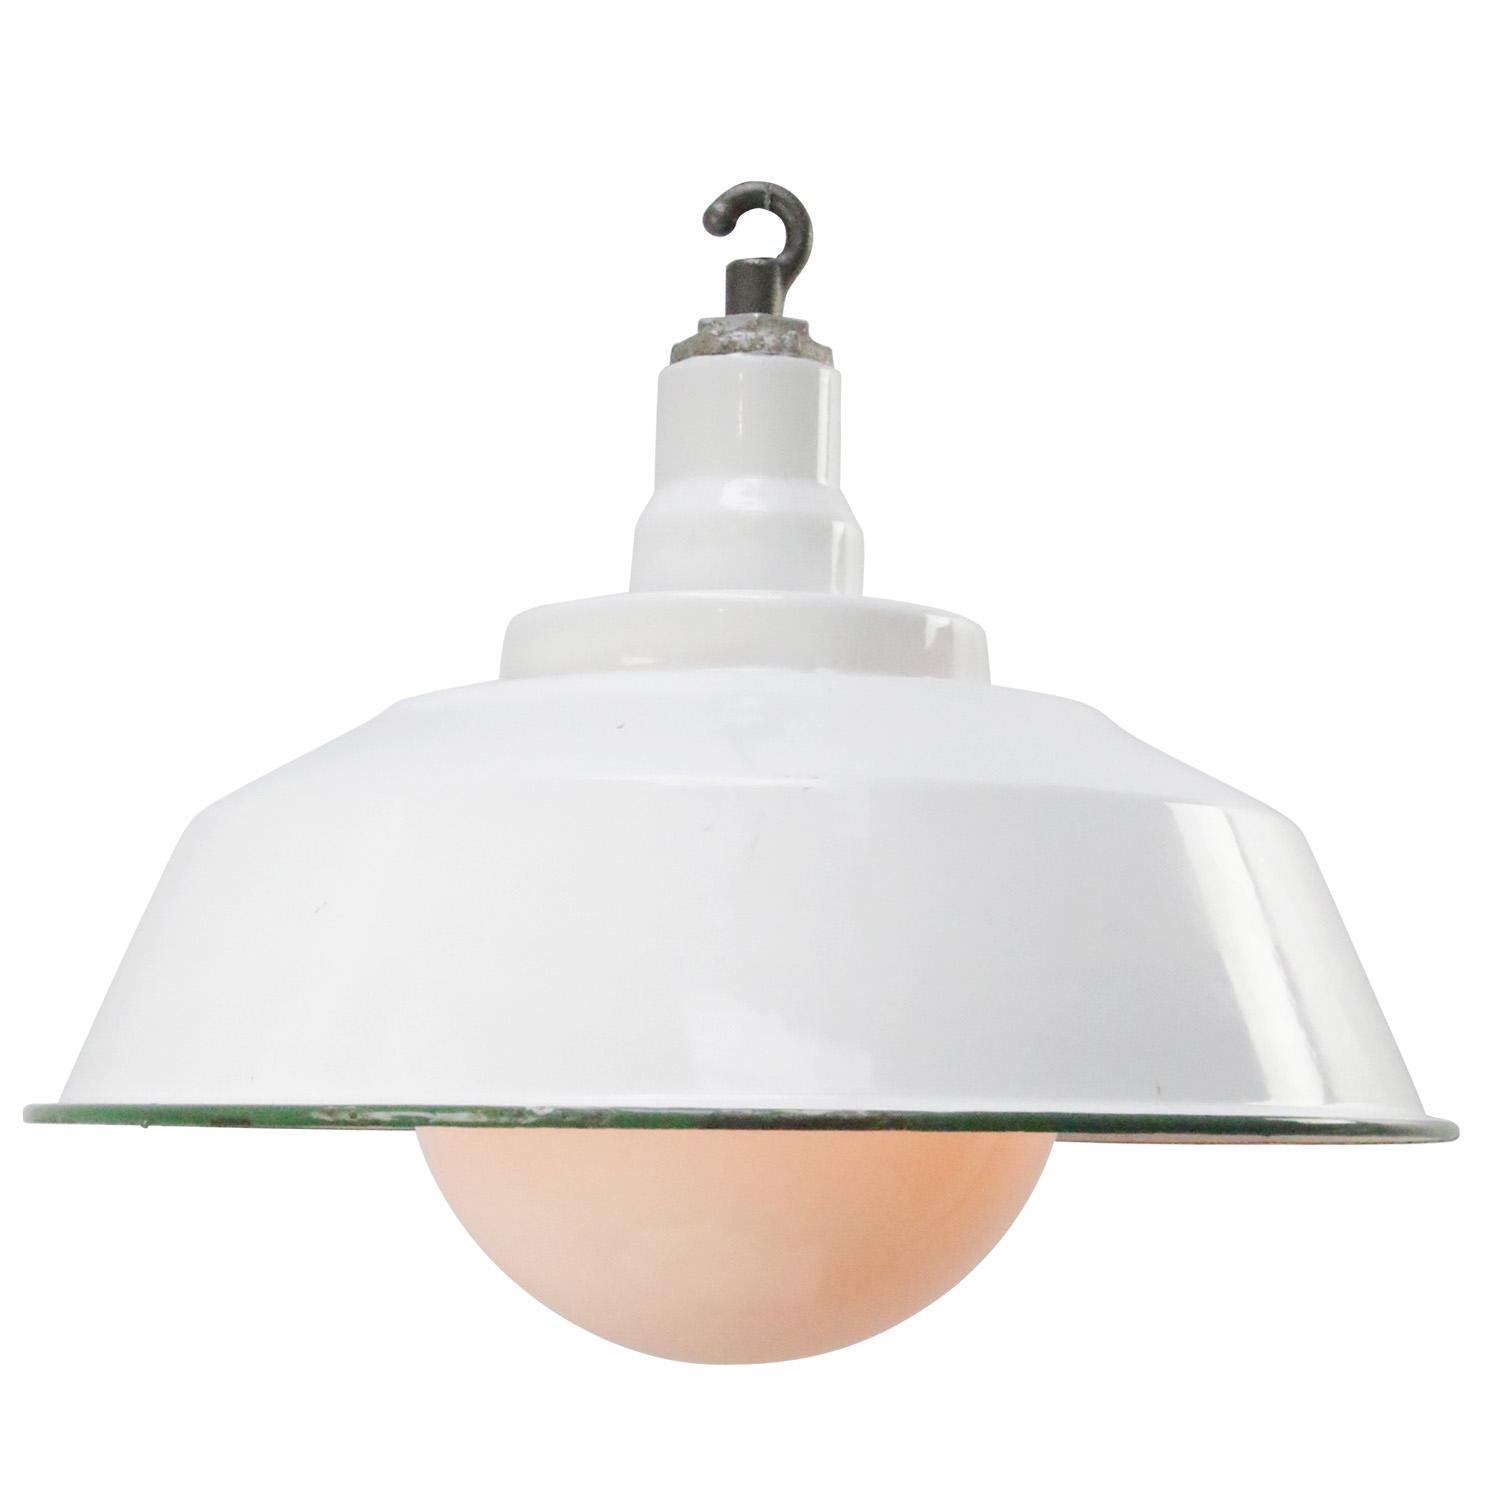 American industrial factory pendant light by Benjamin, USA
white enamel, white interior. Green edge
White opaline globe

Weight 3.90 kg / 8.6 lb

Priced per individual item. All lamps have been made suitable by international standards for